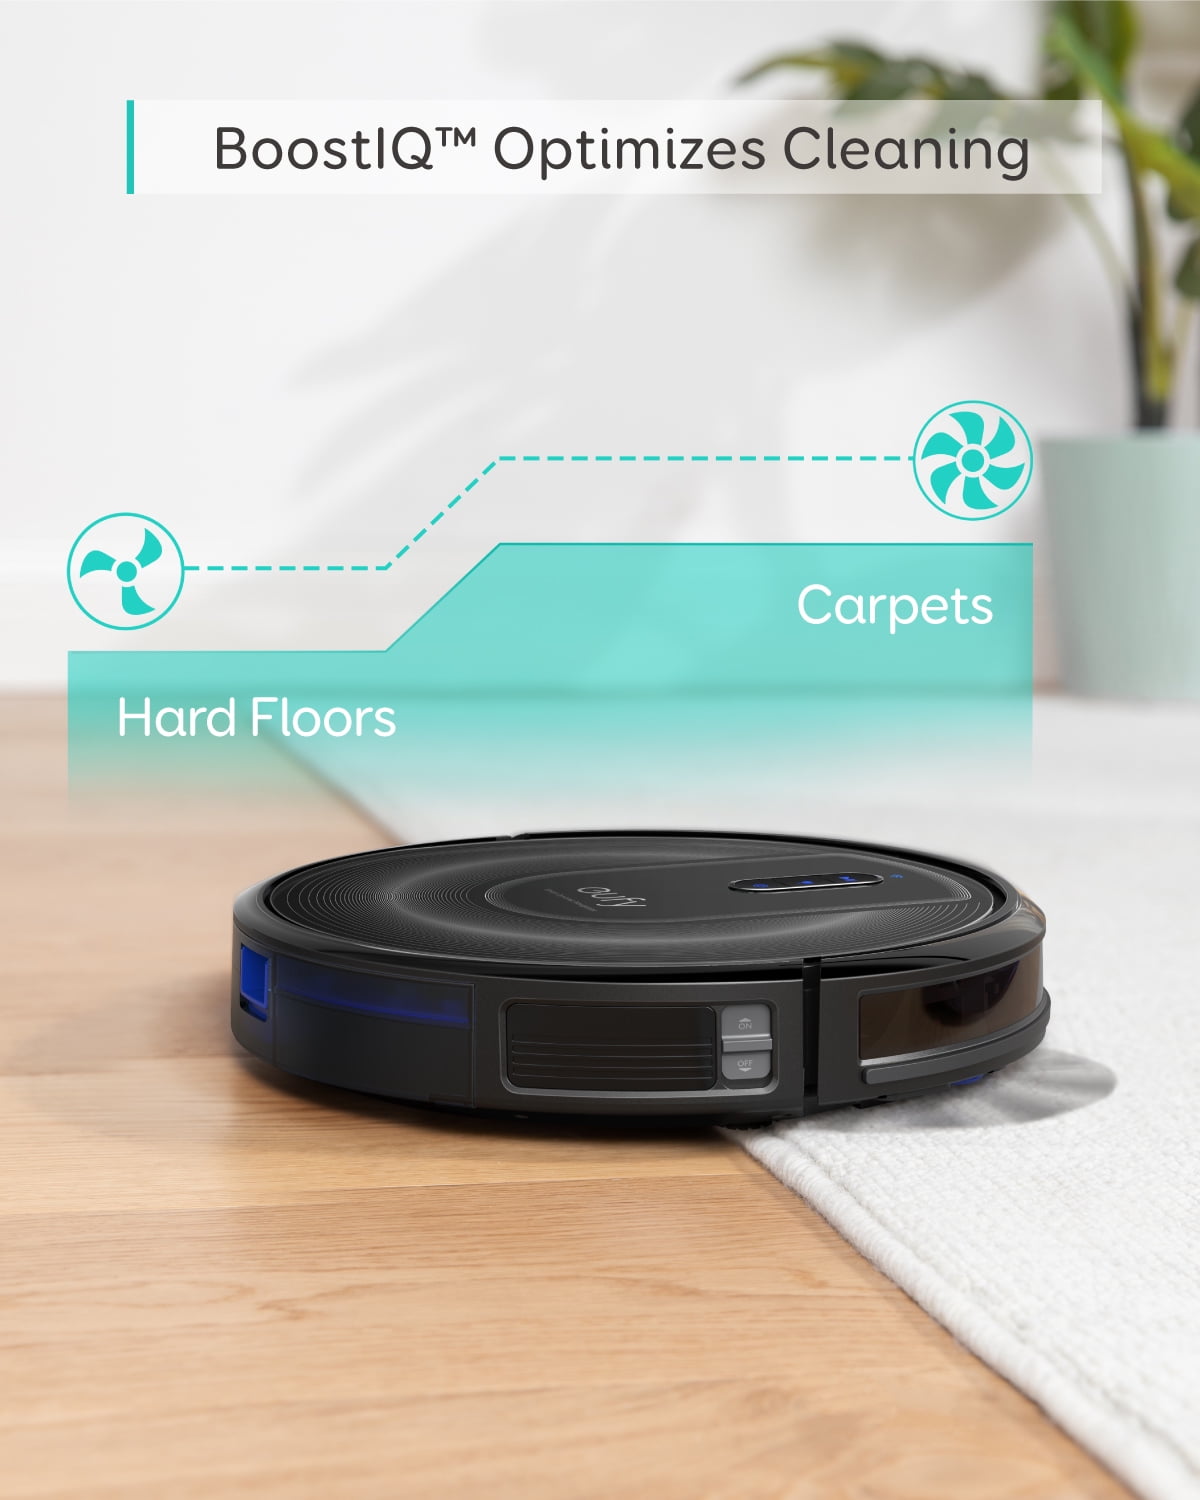 Wi-Fi, T2252Z11, with Mapping, RoboVac eufy New Suction, Robot Vacuum Clean Verge, G30 2000Pa Home